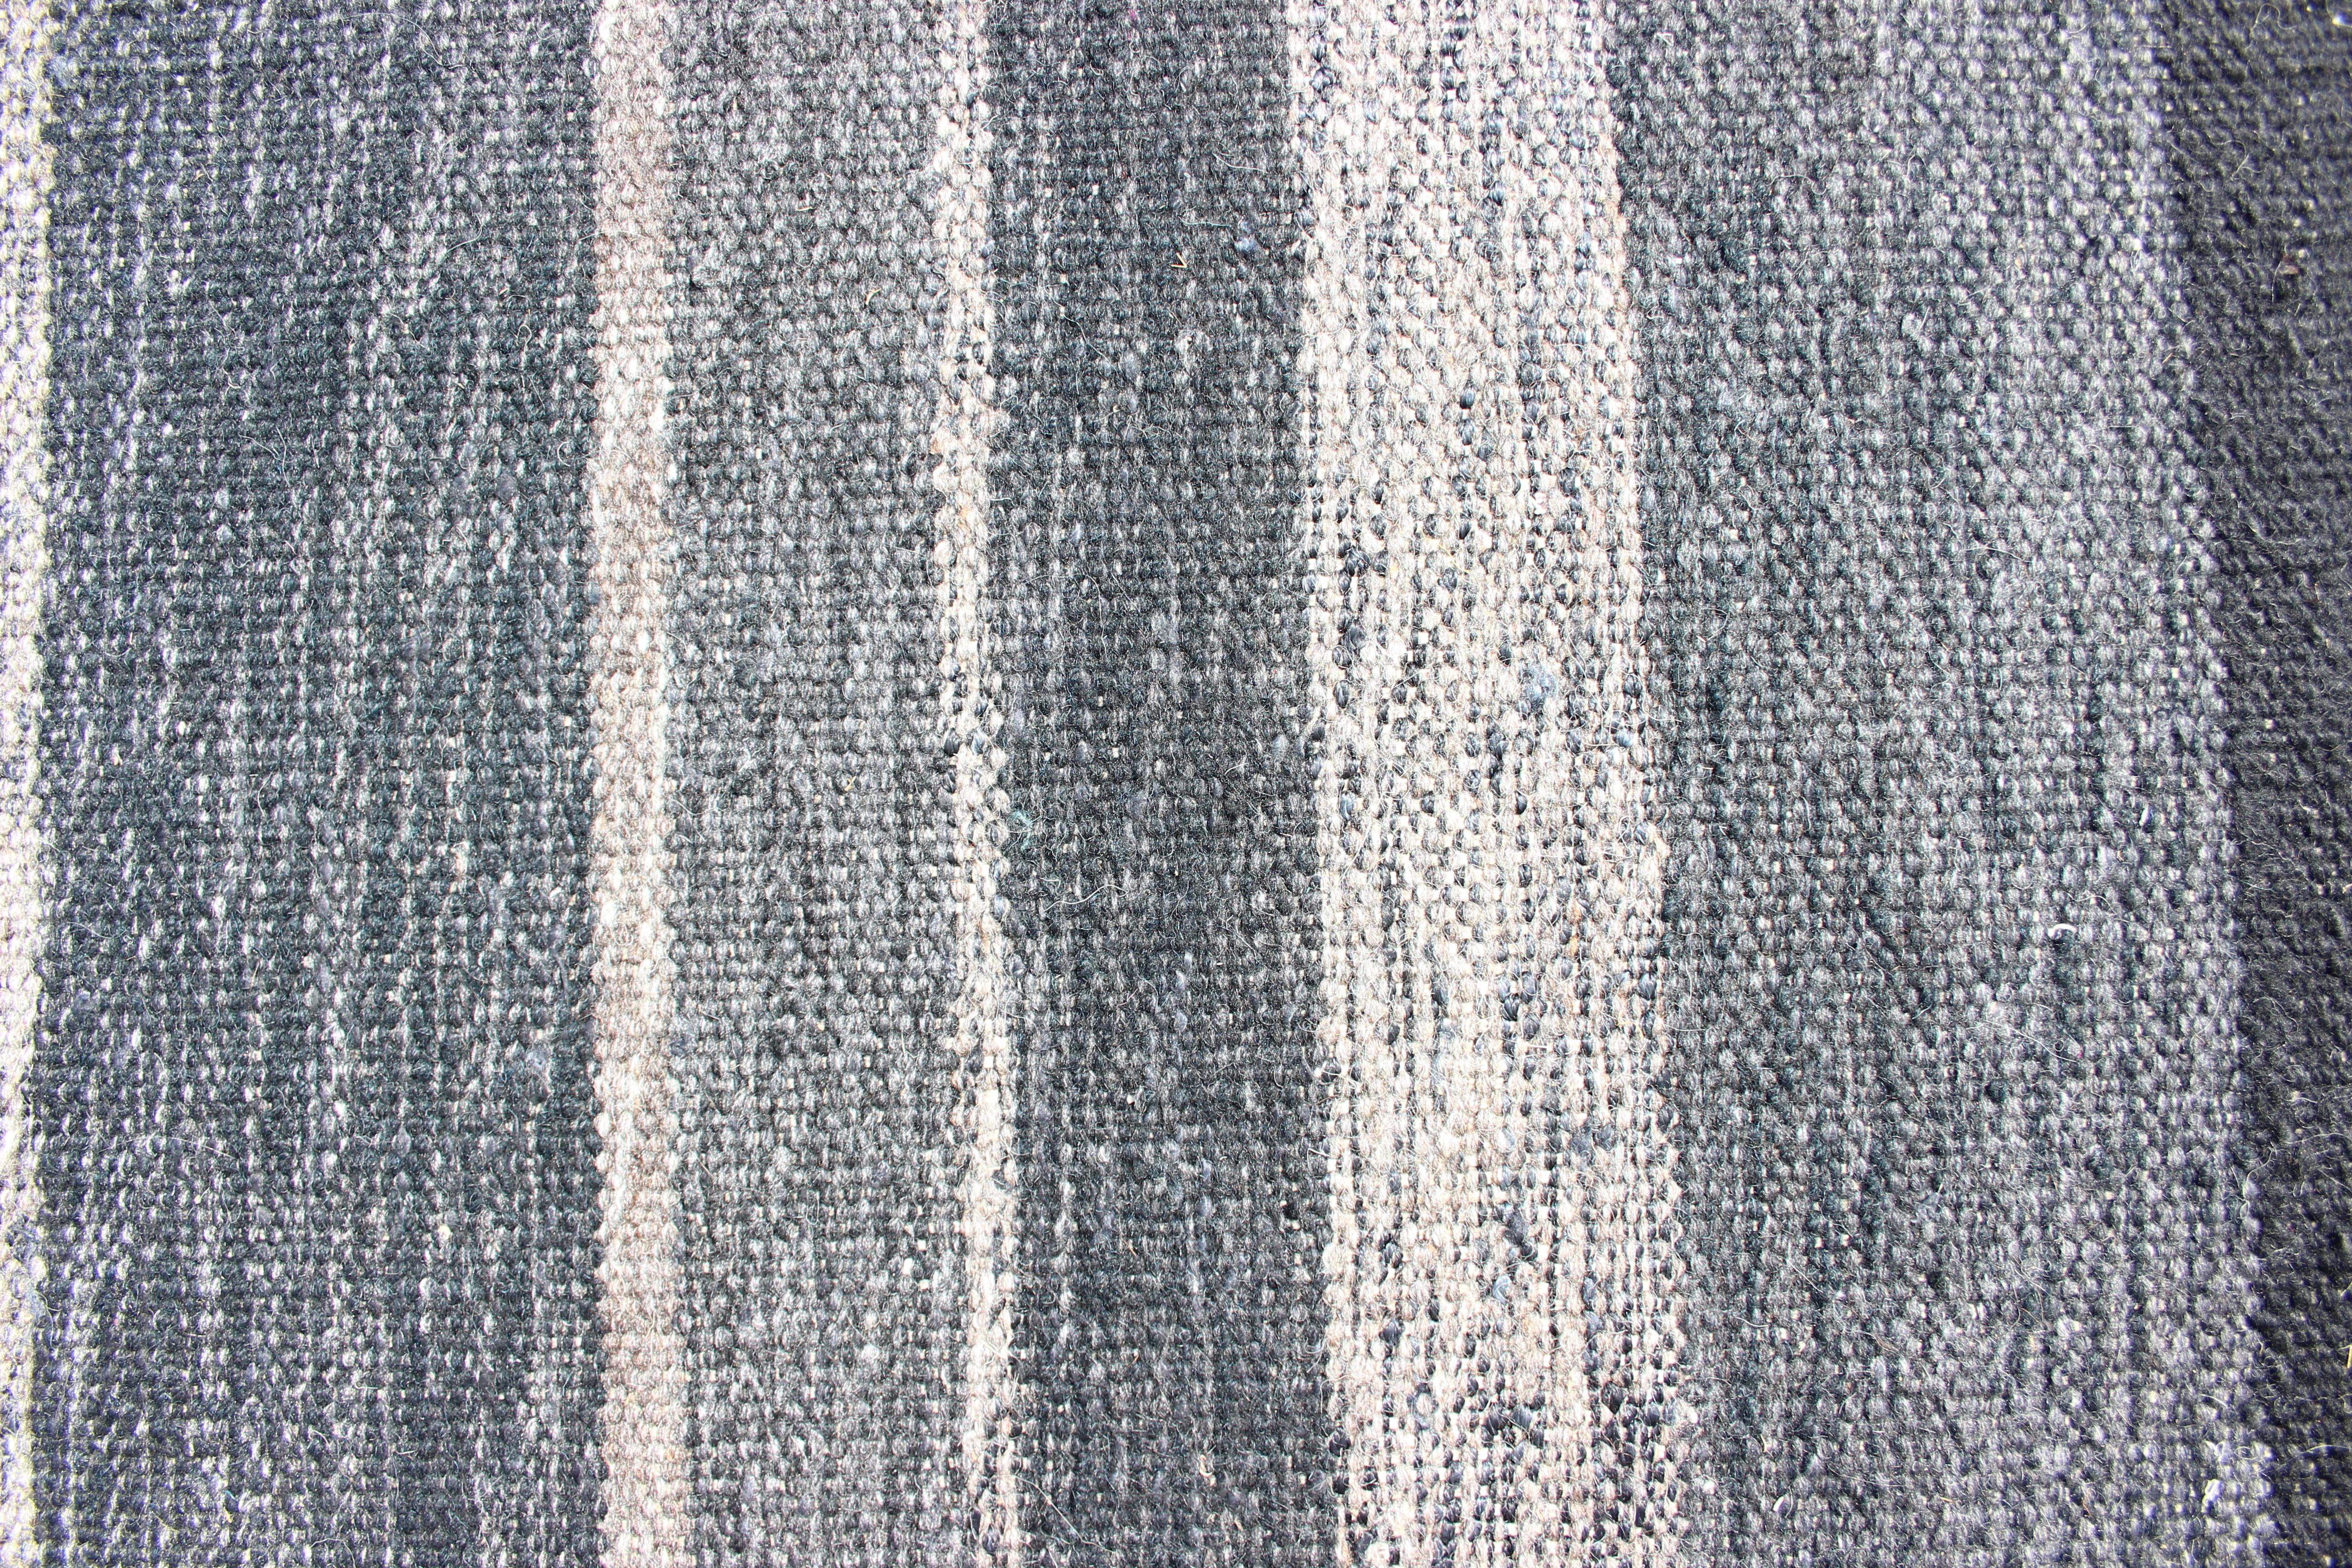 Indian Modern Scandinavian Flat-Weave Rug with Striped Panel Design in Gray, Steel Blue For Sale